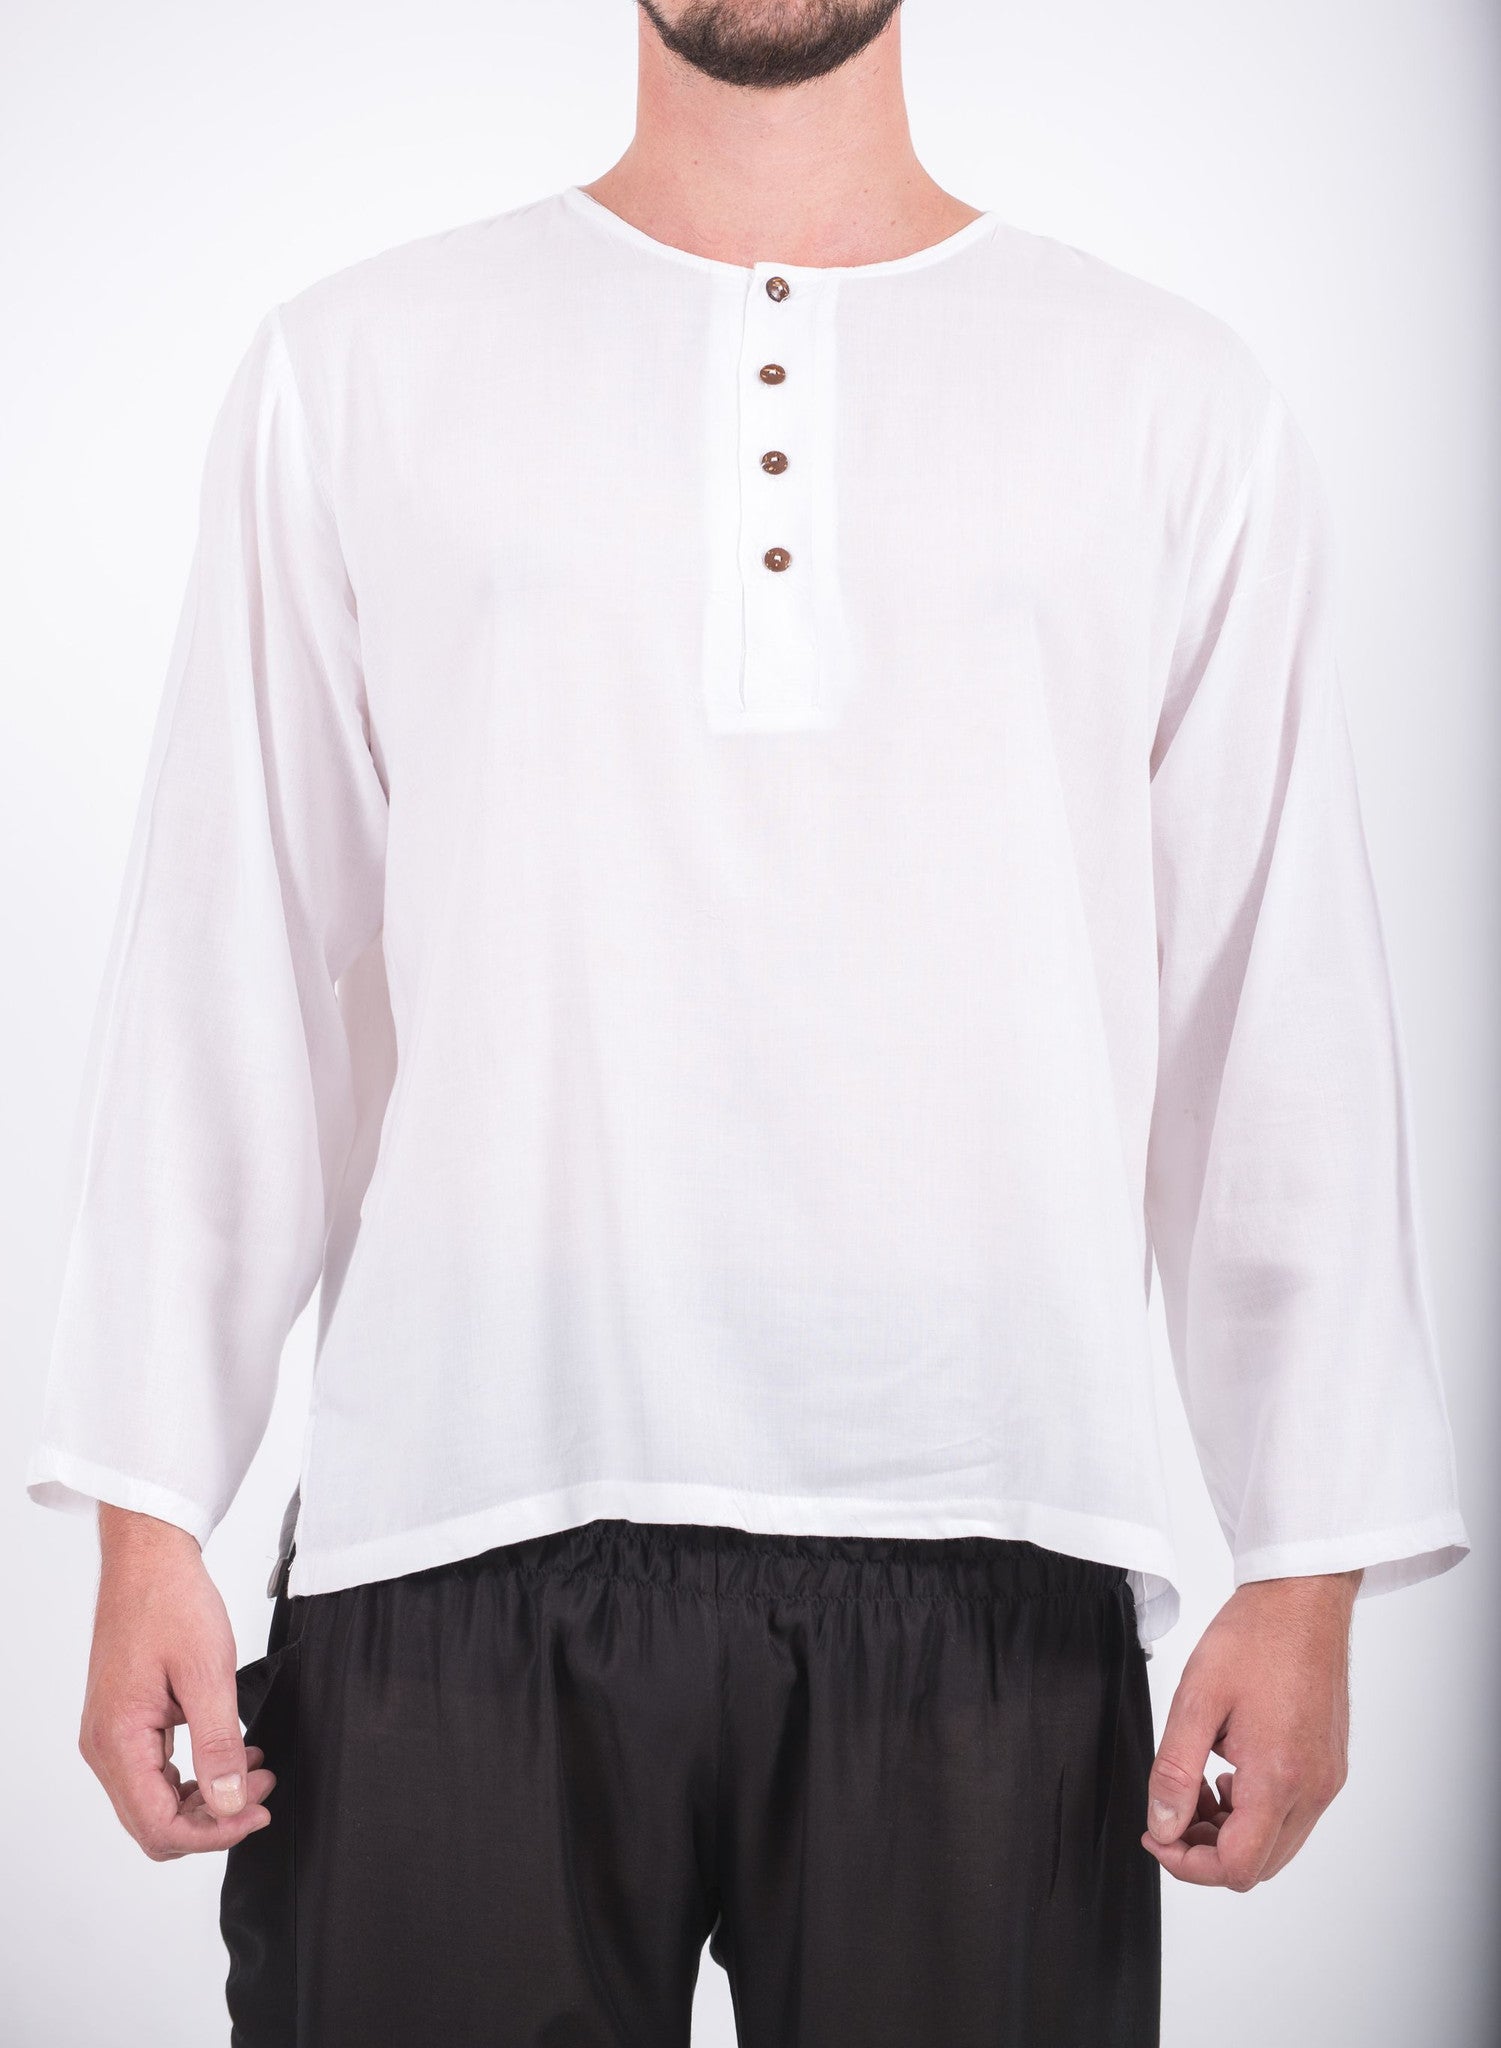 Mens Yoga Shirts No Collar with Coconut Buttons in White